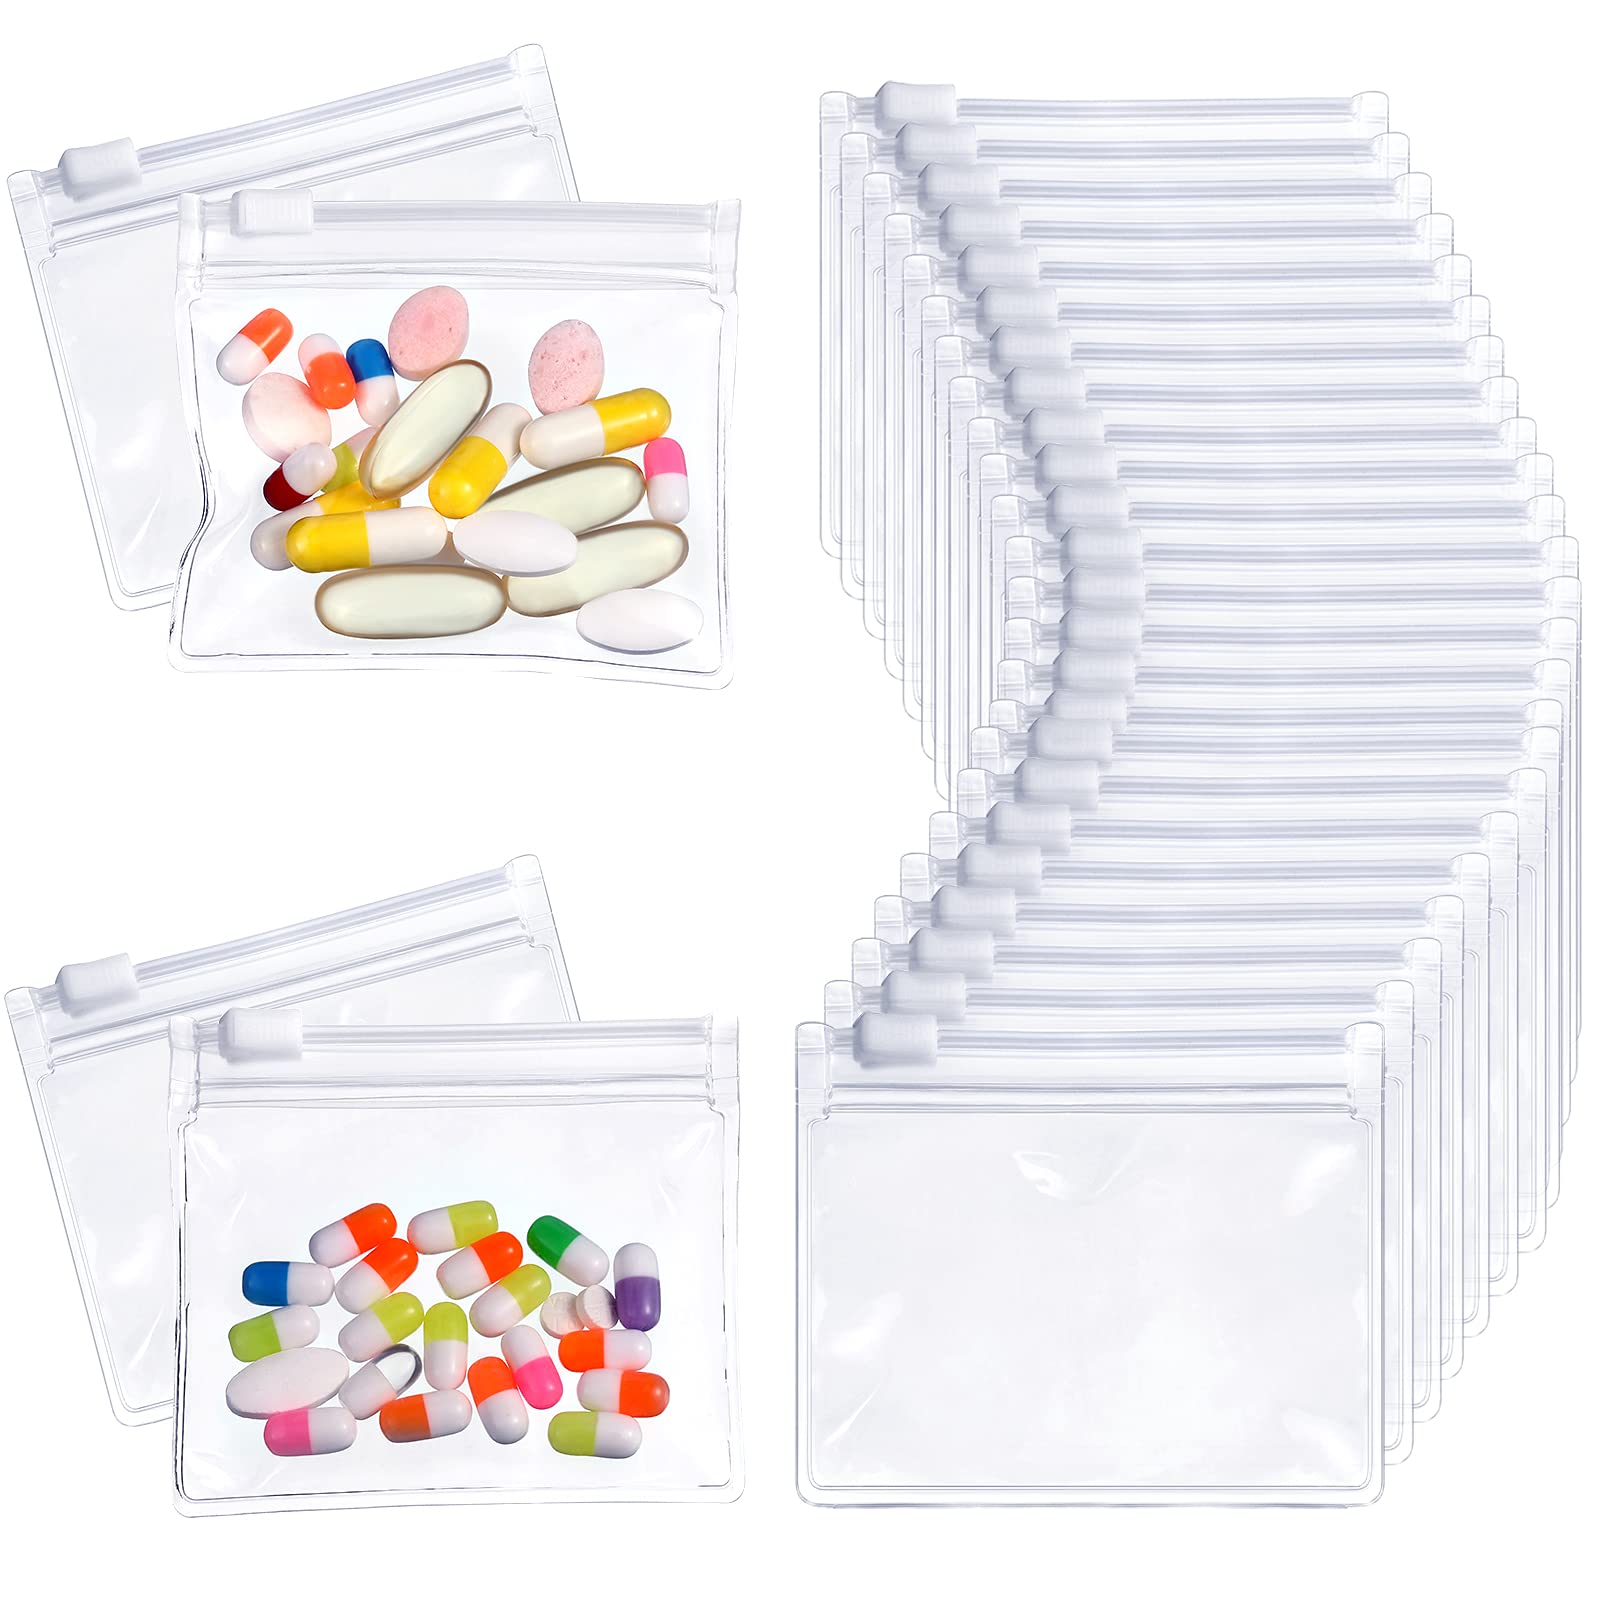 Skycase Pill Pouch Bags (200 Pack), Clear Resealable Travel Pill Bags Daily Travel Medicine Organizer Write-On Label Portable Plastic Pouch Small Bags